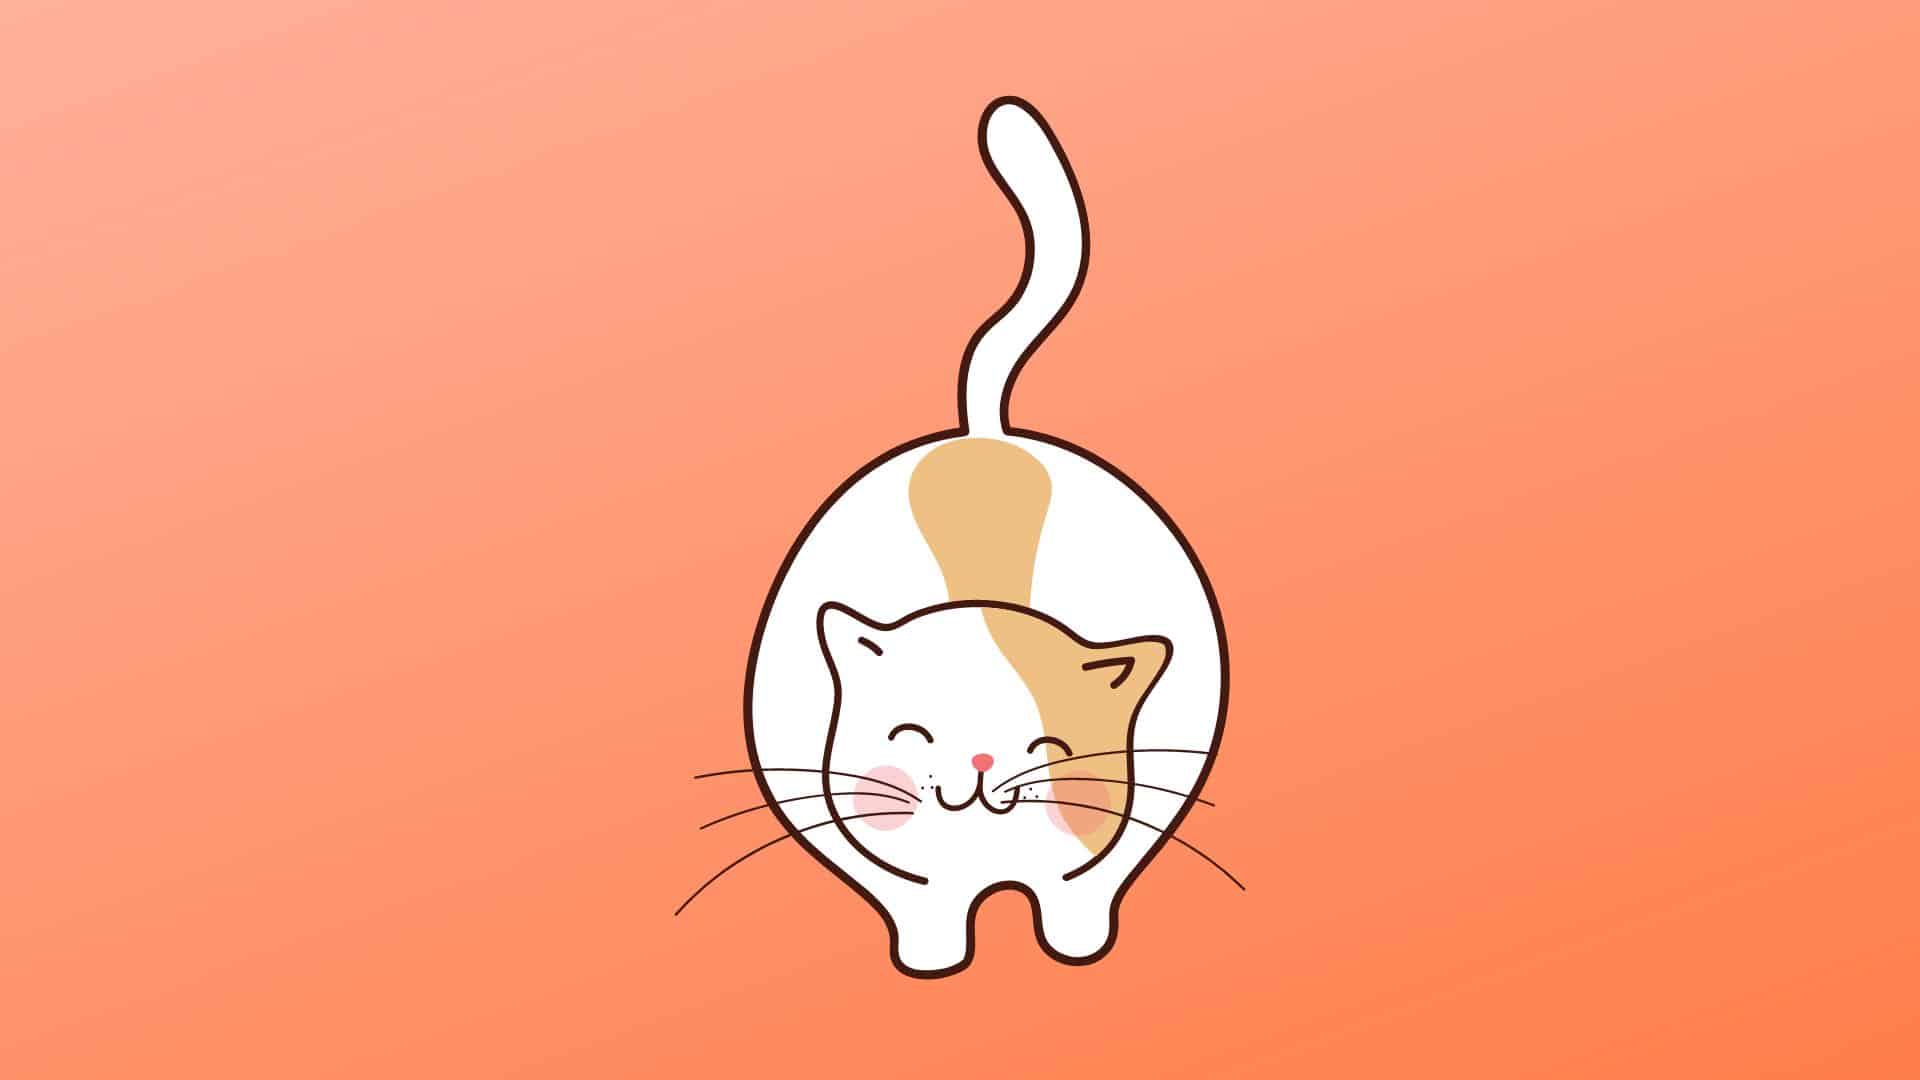 illlustration of cat wiith tail up